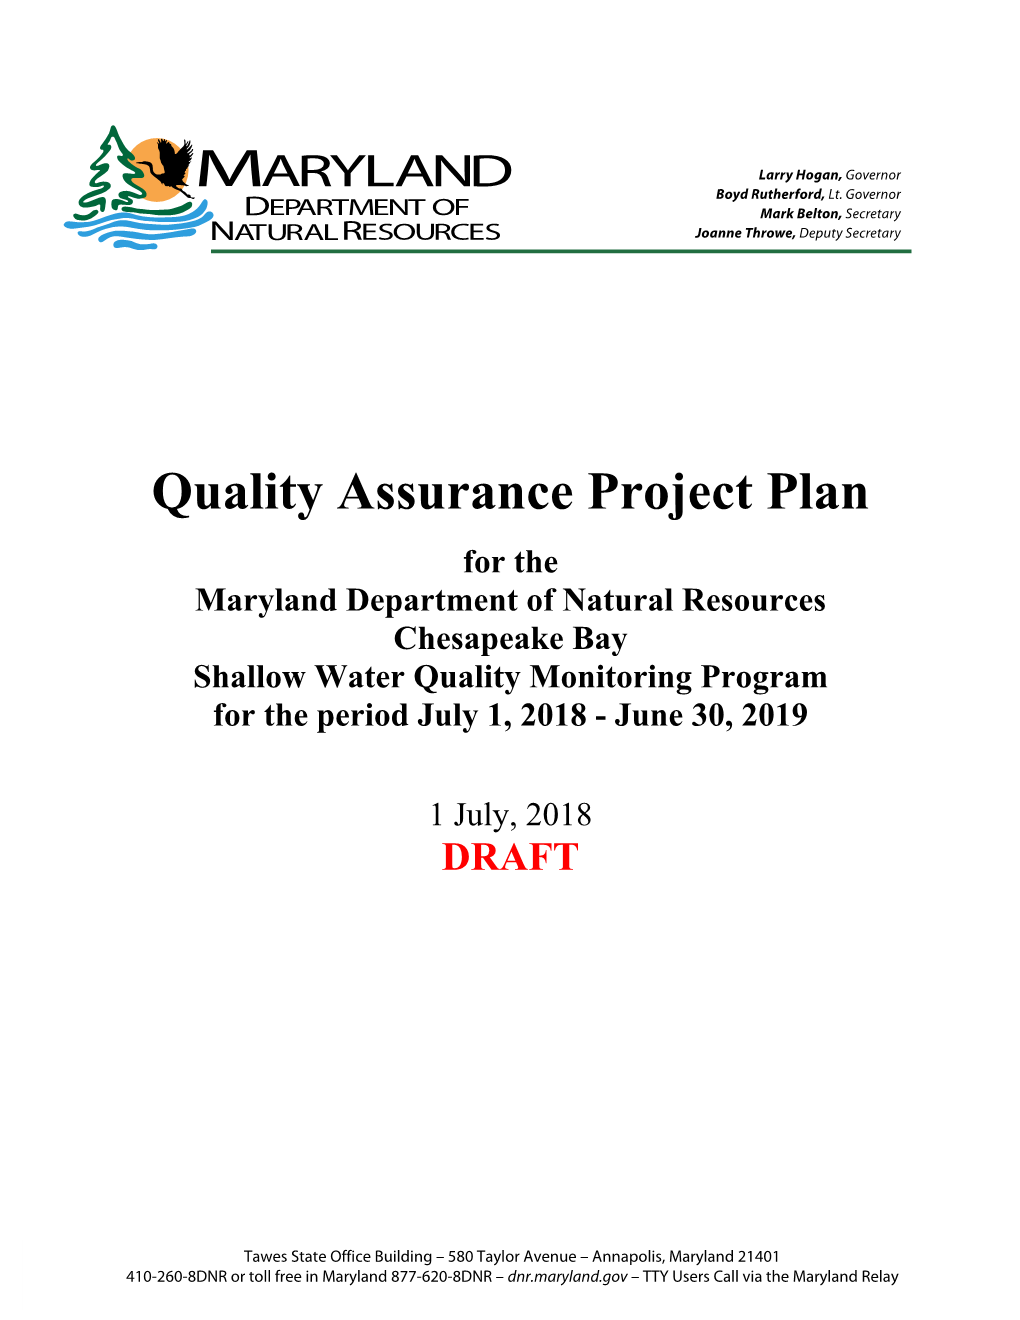 Quality Assurance Project Plan for the Maryland Chesapeake Bay Shallow